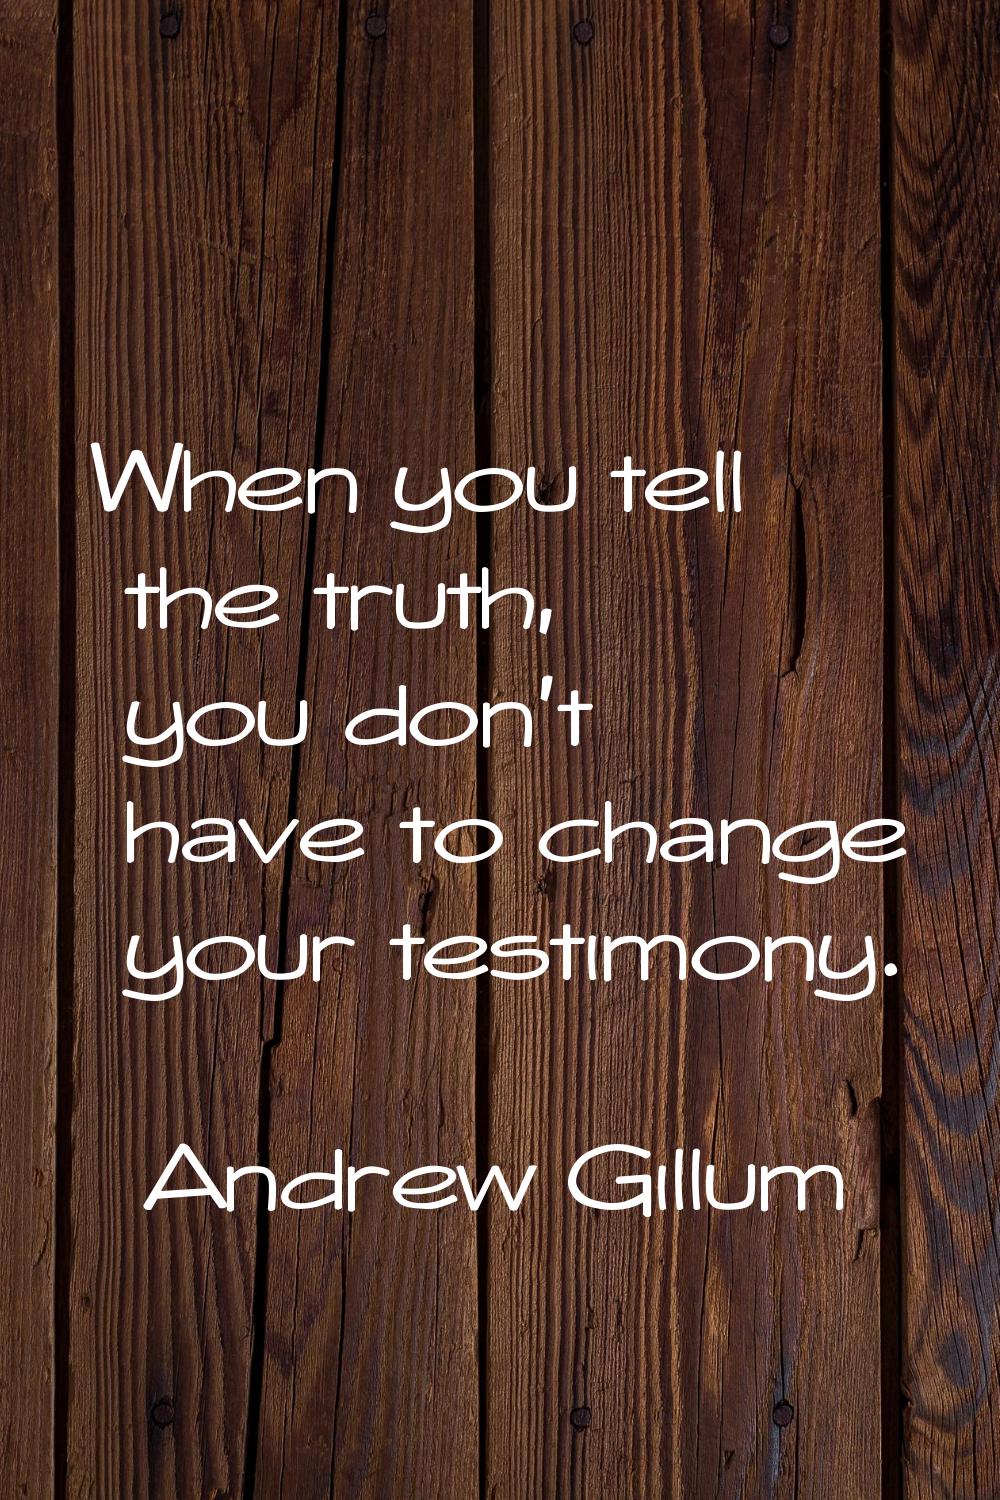 When you tell the truth, you don't have to change your testimony.